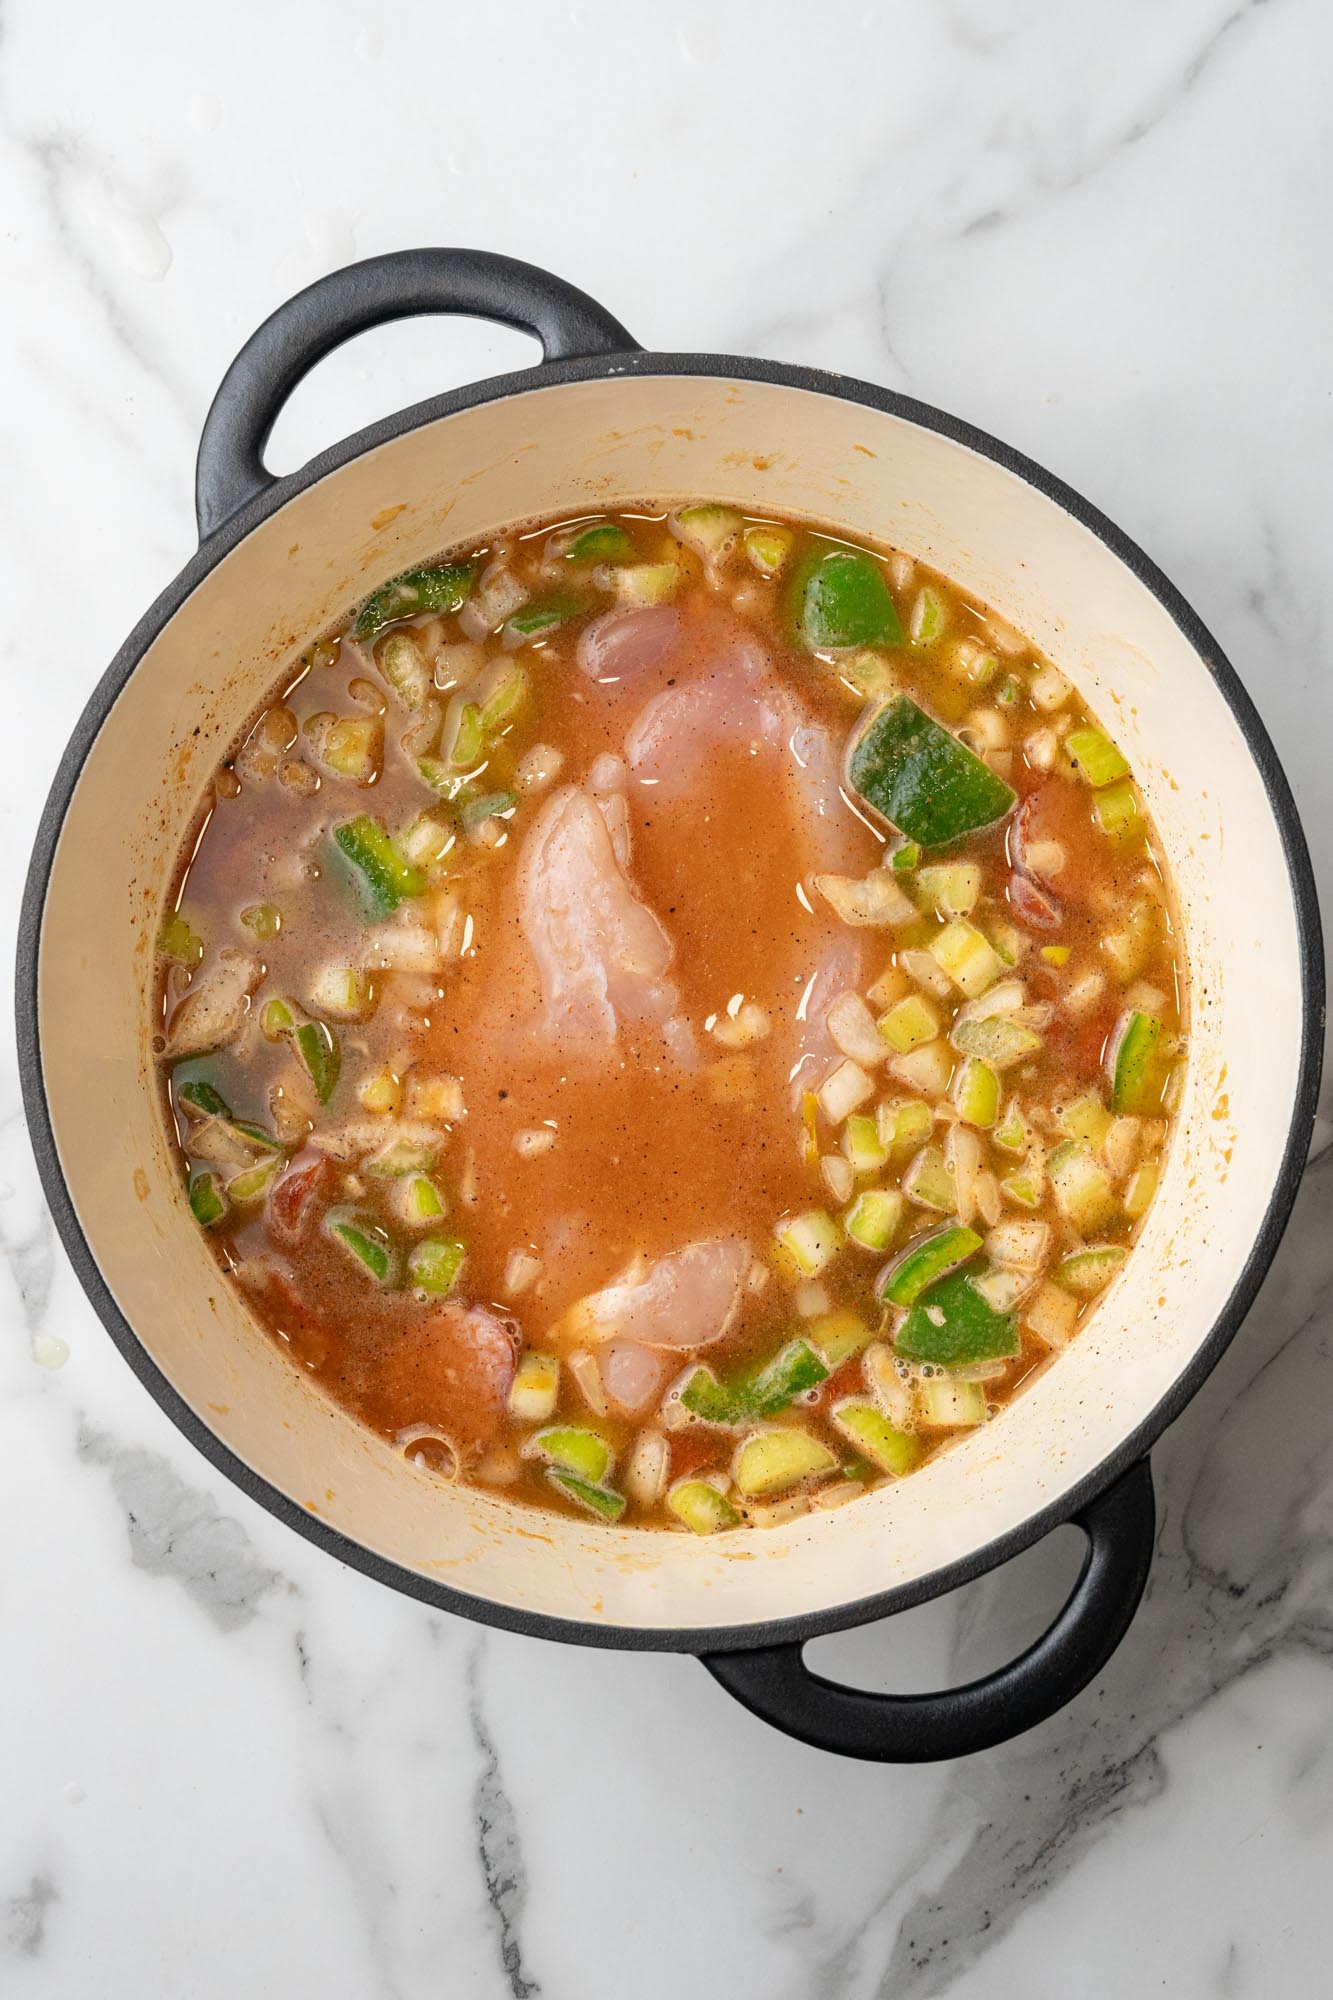 raw chicken breasts added to gumbo in a dutch oven.